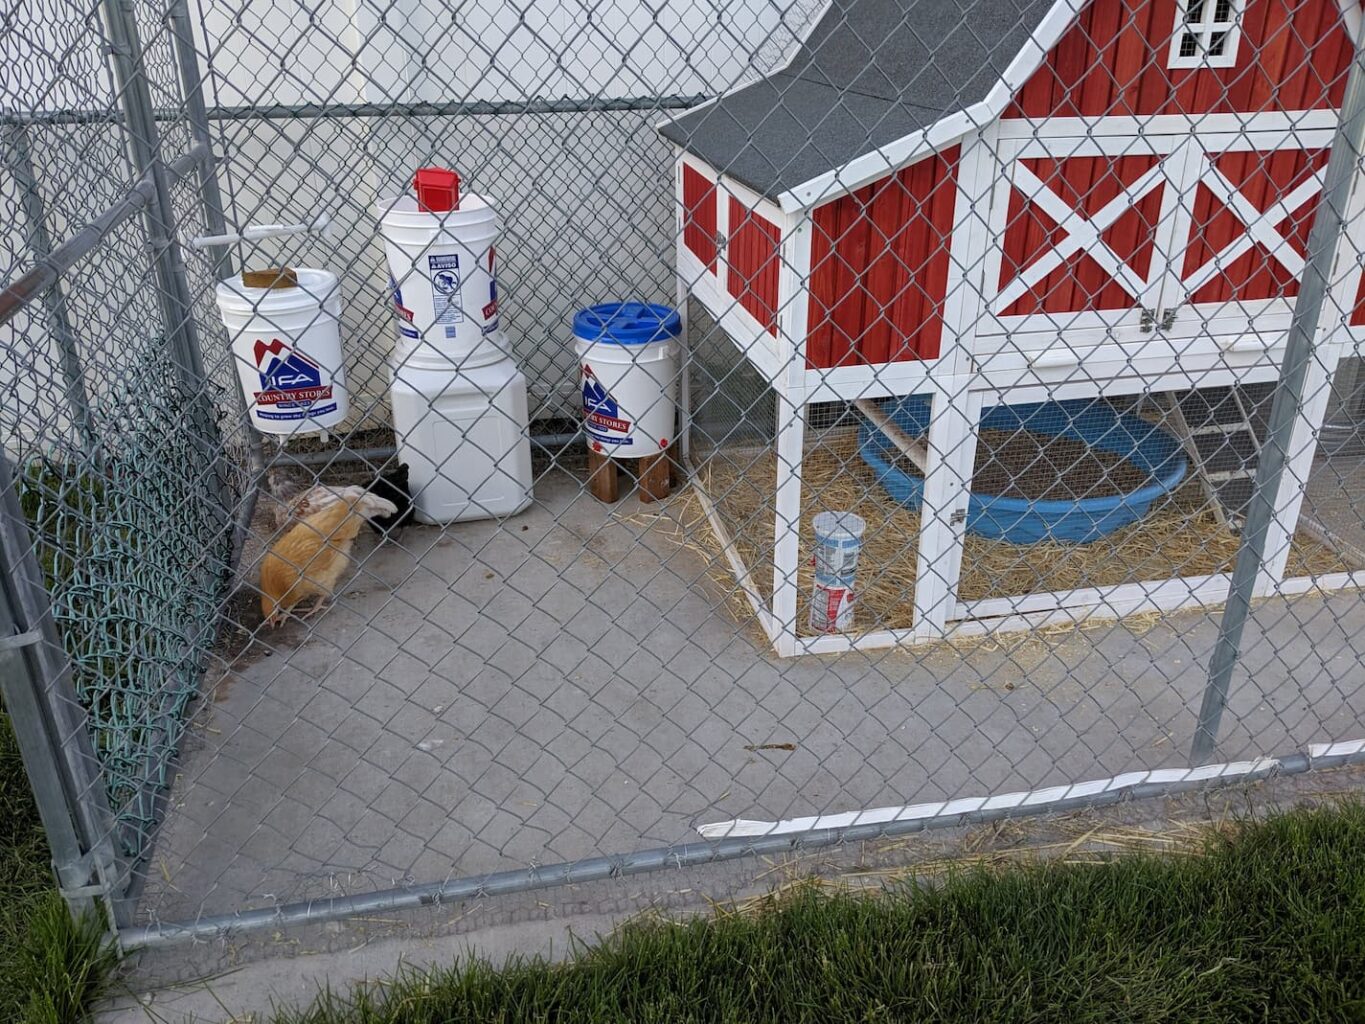 An image of a chicken coop